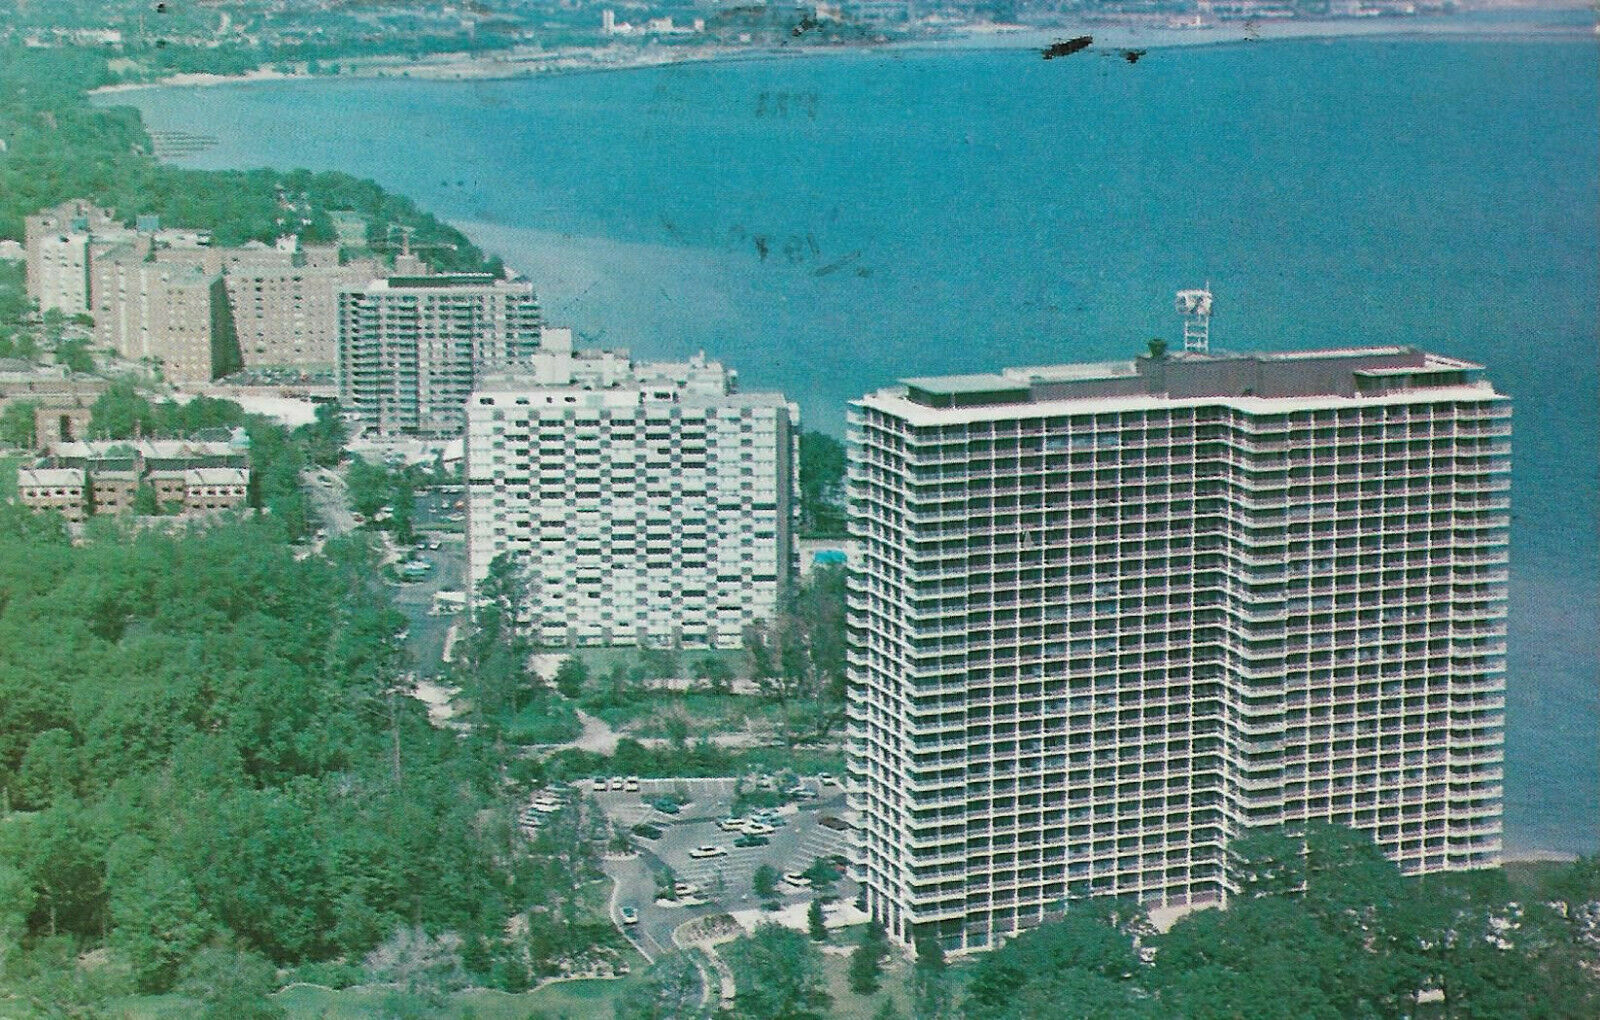 House Clearance - USA-Ohio-Cleveland-Overlooking the cliffs of scenic Lake Erie - 1970